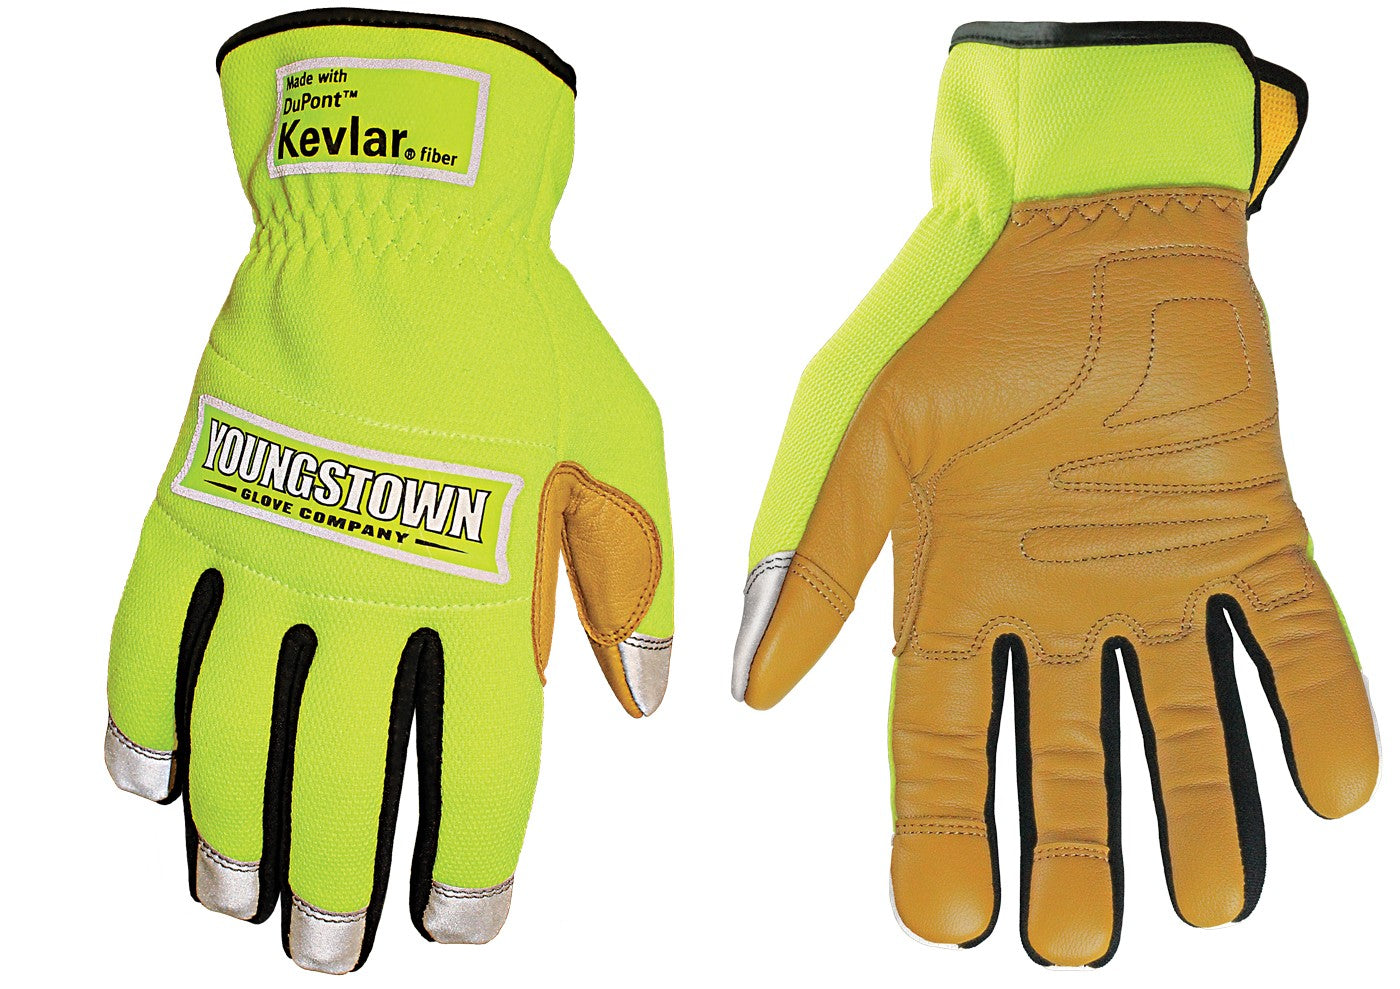 Guantes Safety Lime Hybrid Plus - Extra grandes